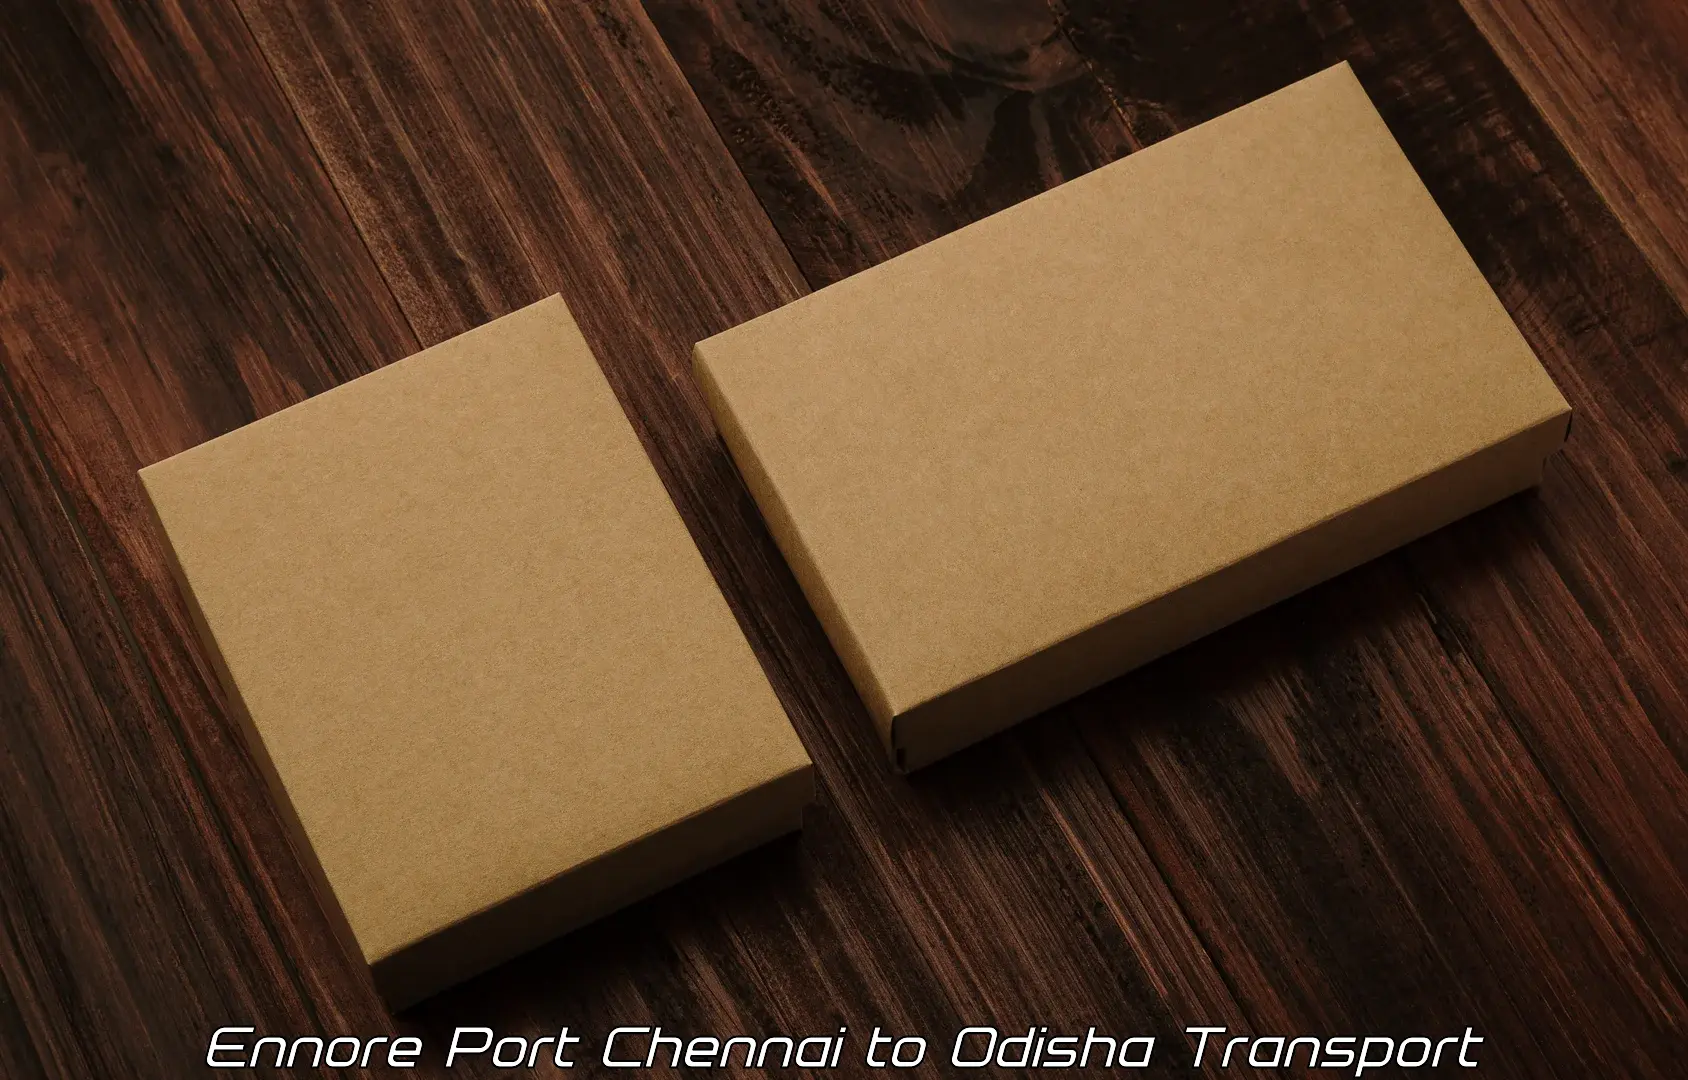 Shipping services Ennore Port Chennai to Champua